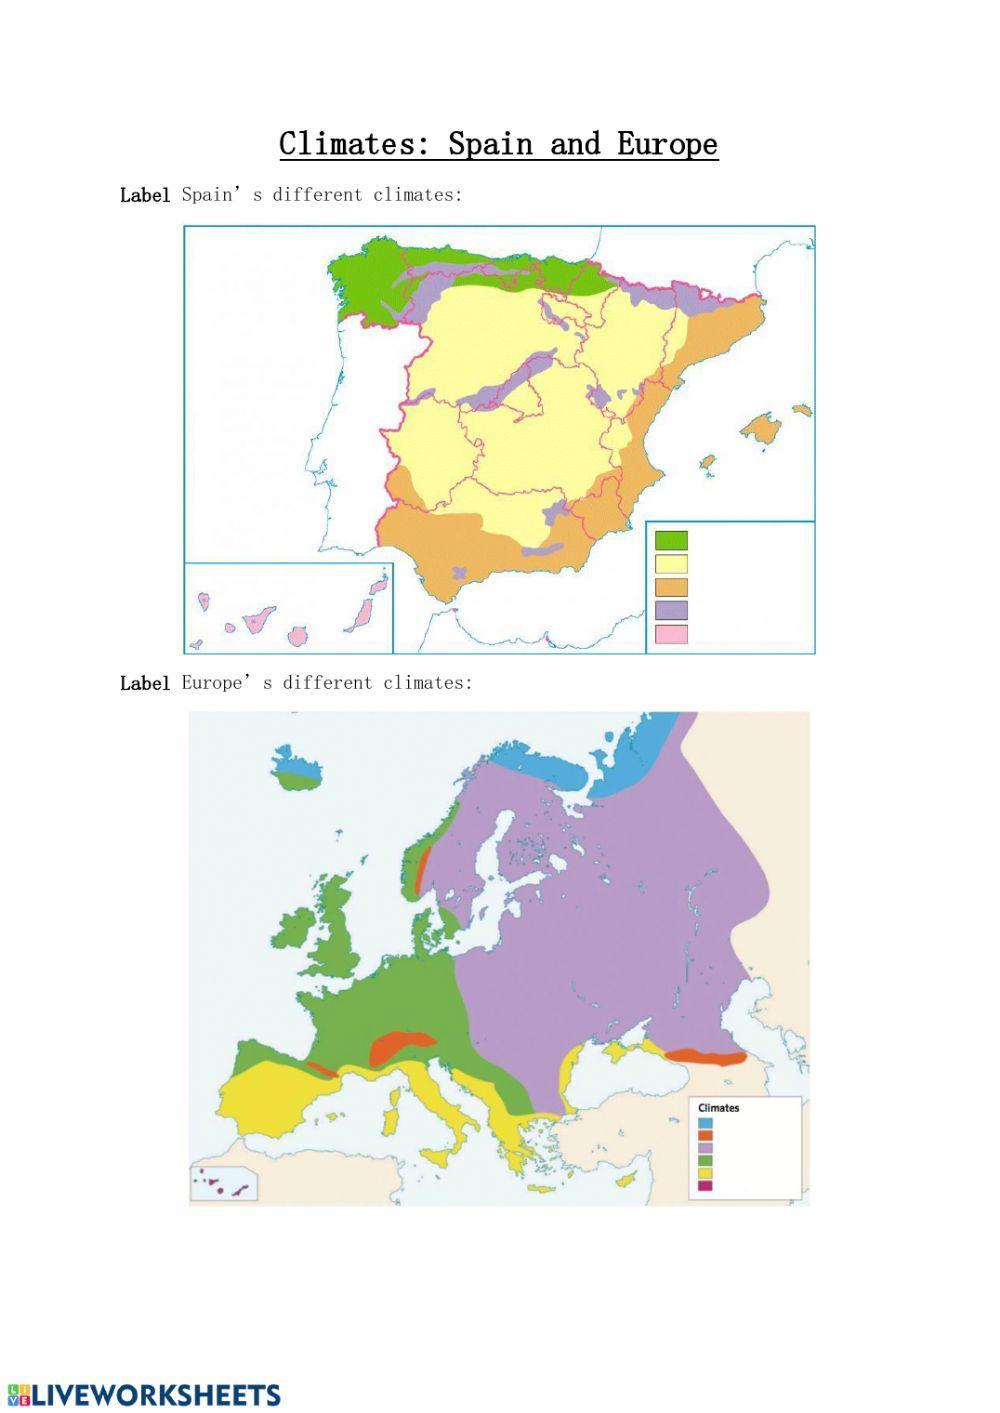 Spain and Europe climates